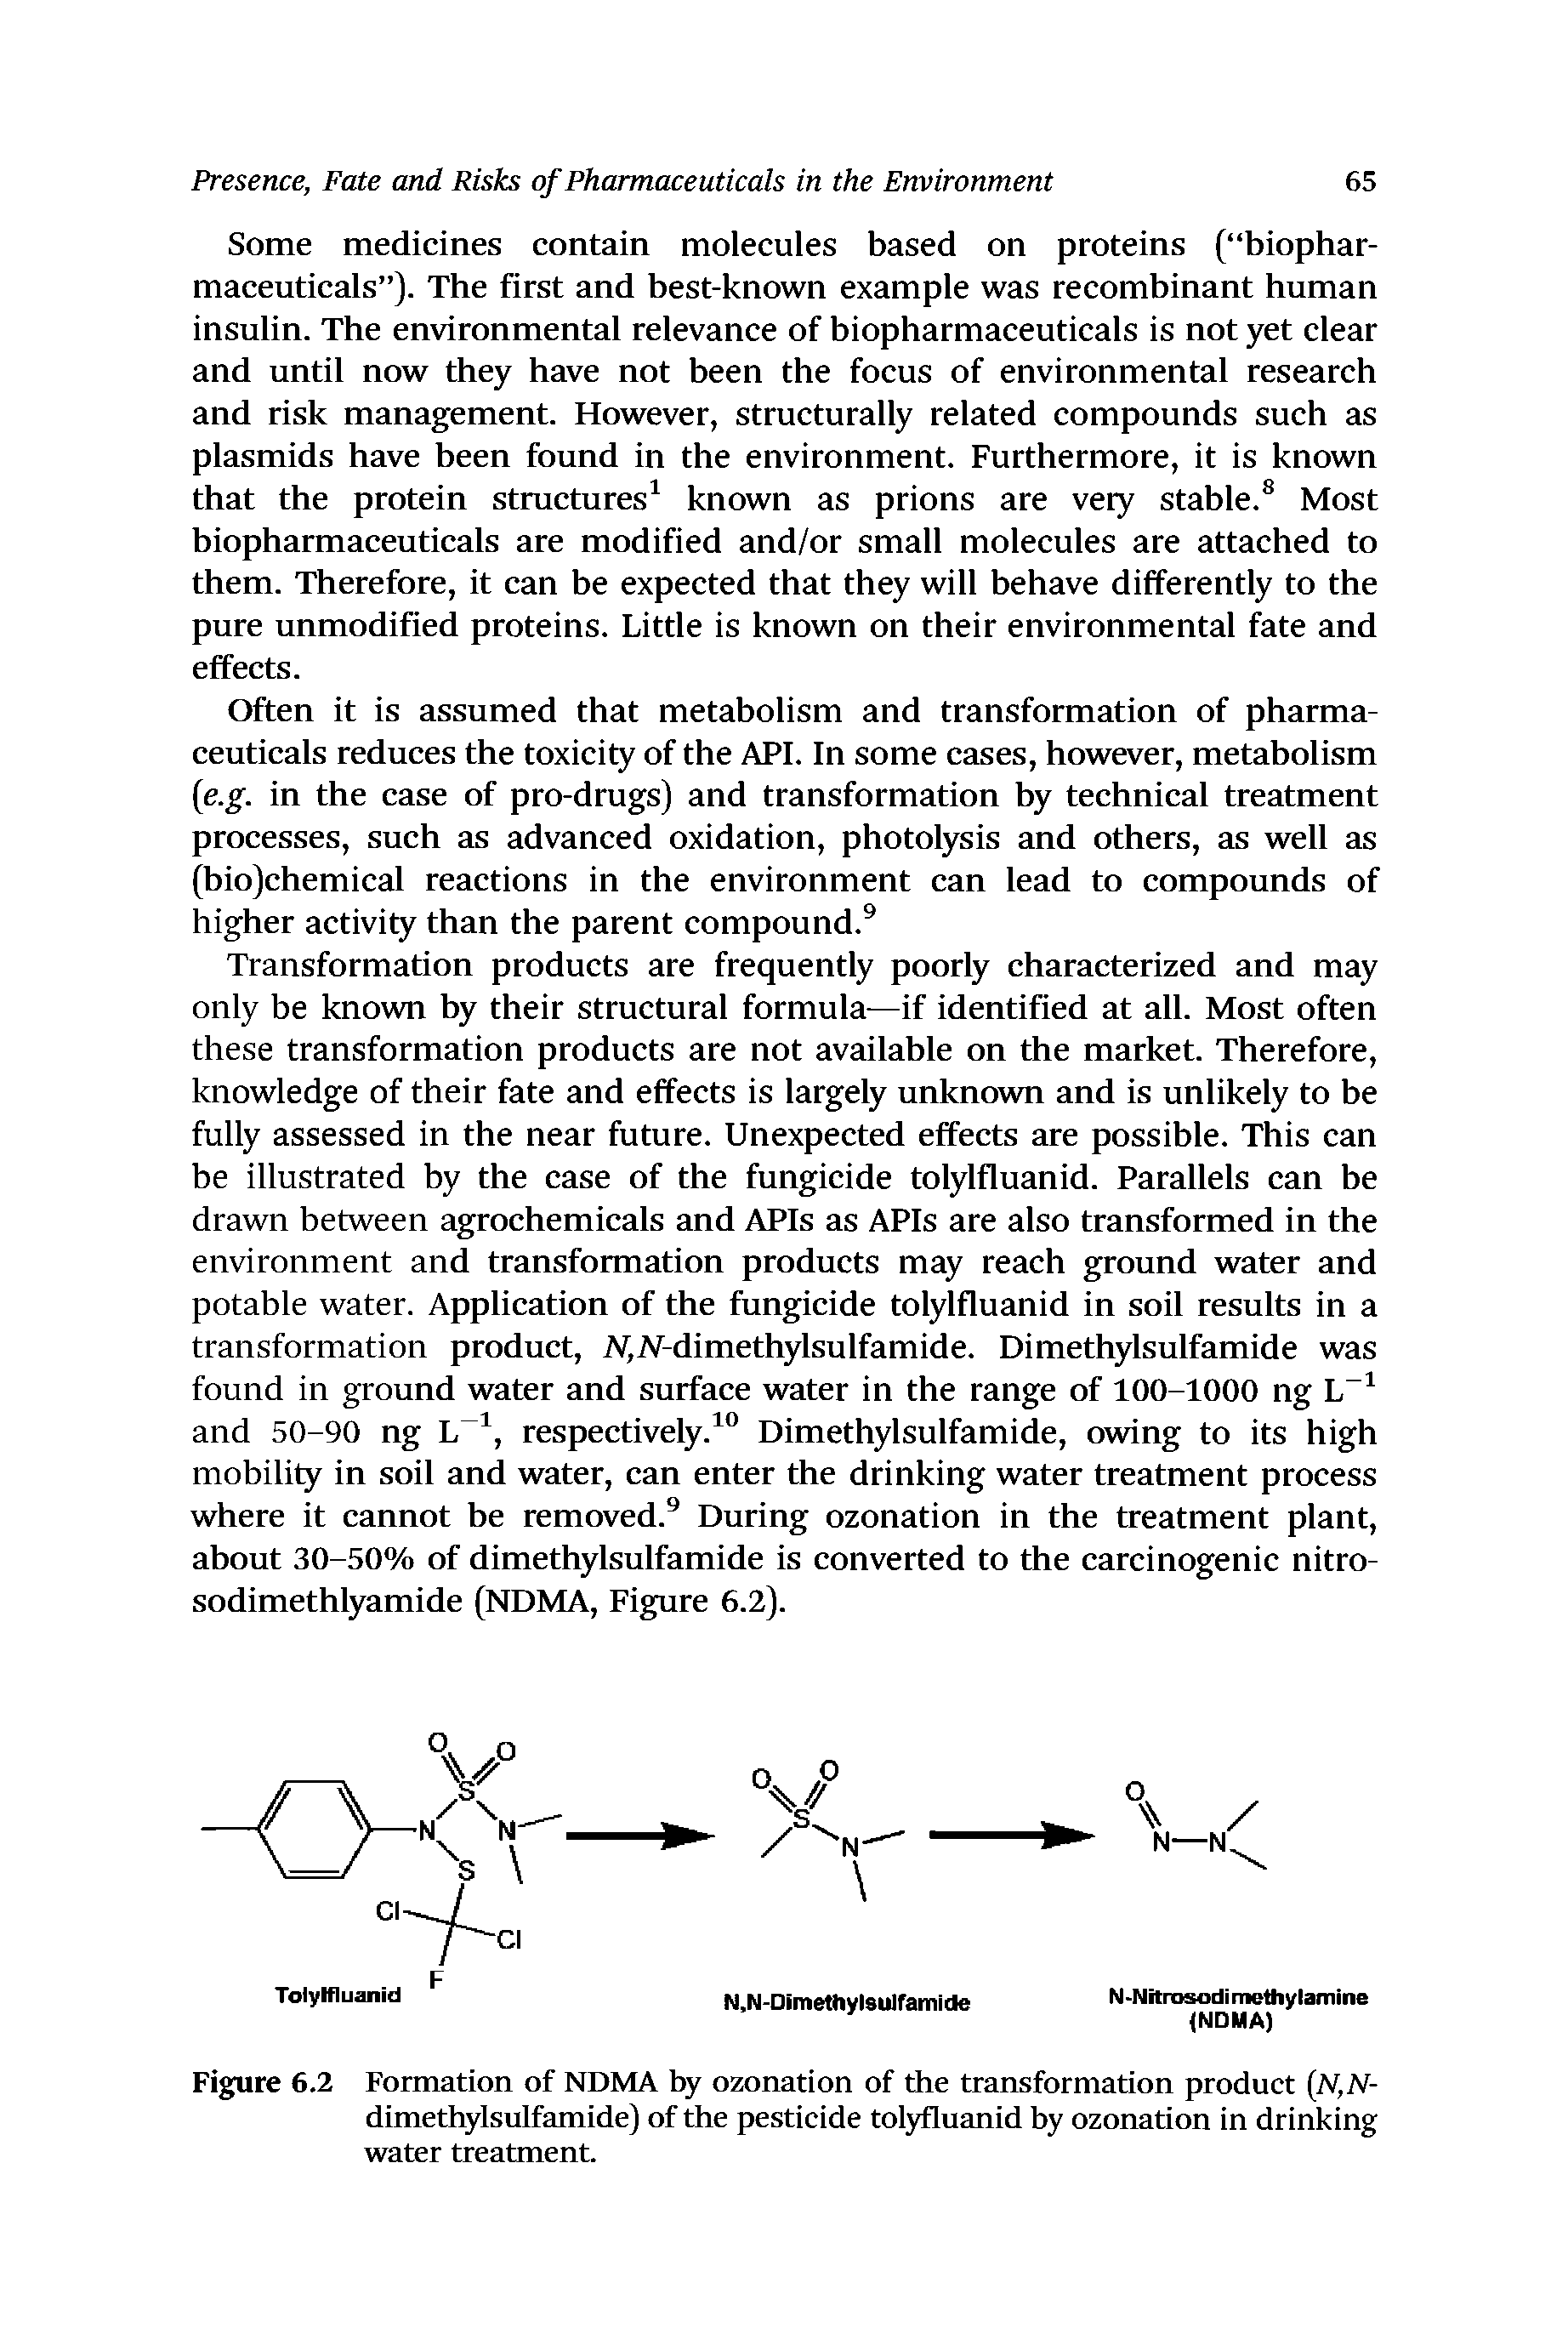 Figure 6.2 Formation of NDMA by ozonation of the transformation product N,N-dimethylsulfamide) of the pesticide tolyfluanid by ozonation in drinking water treatment.